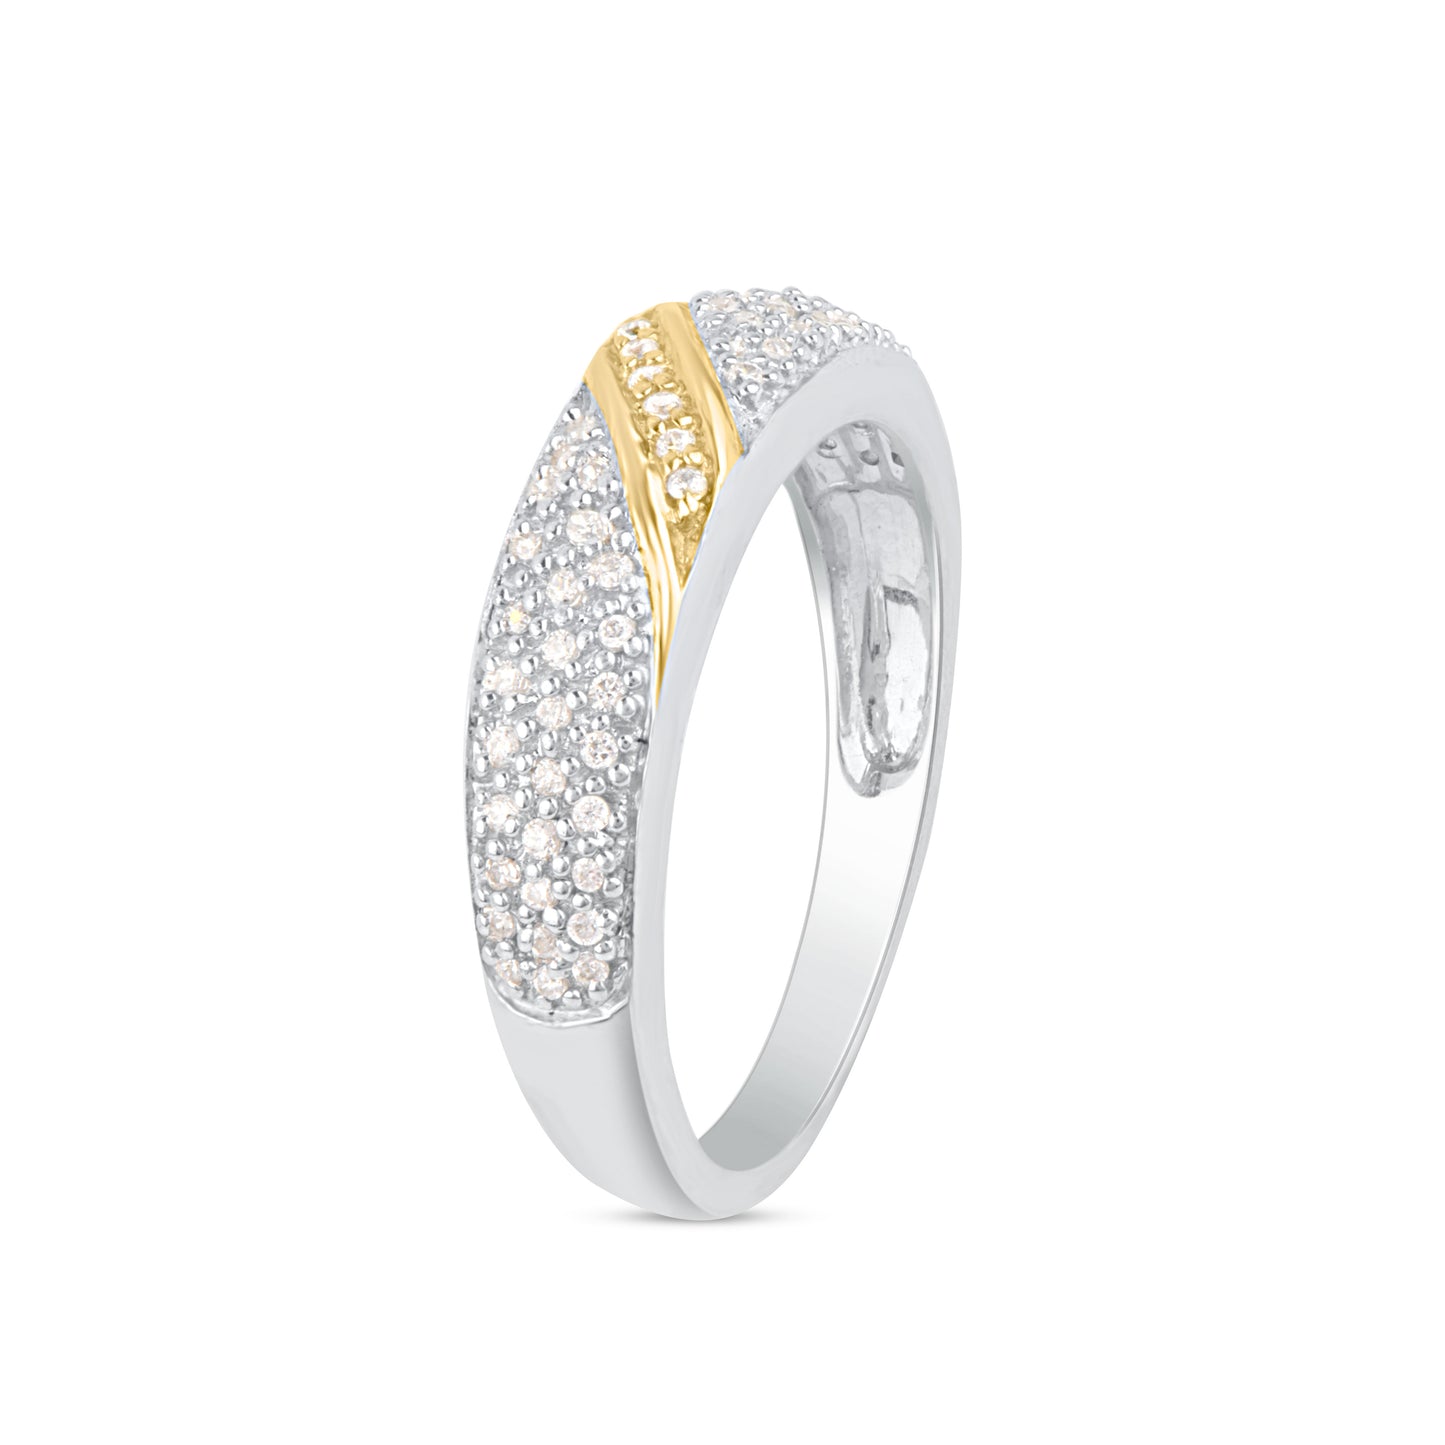 Half Eternity Engagement Band in Two Tone Gold Plated 925 Sterling Silver